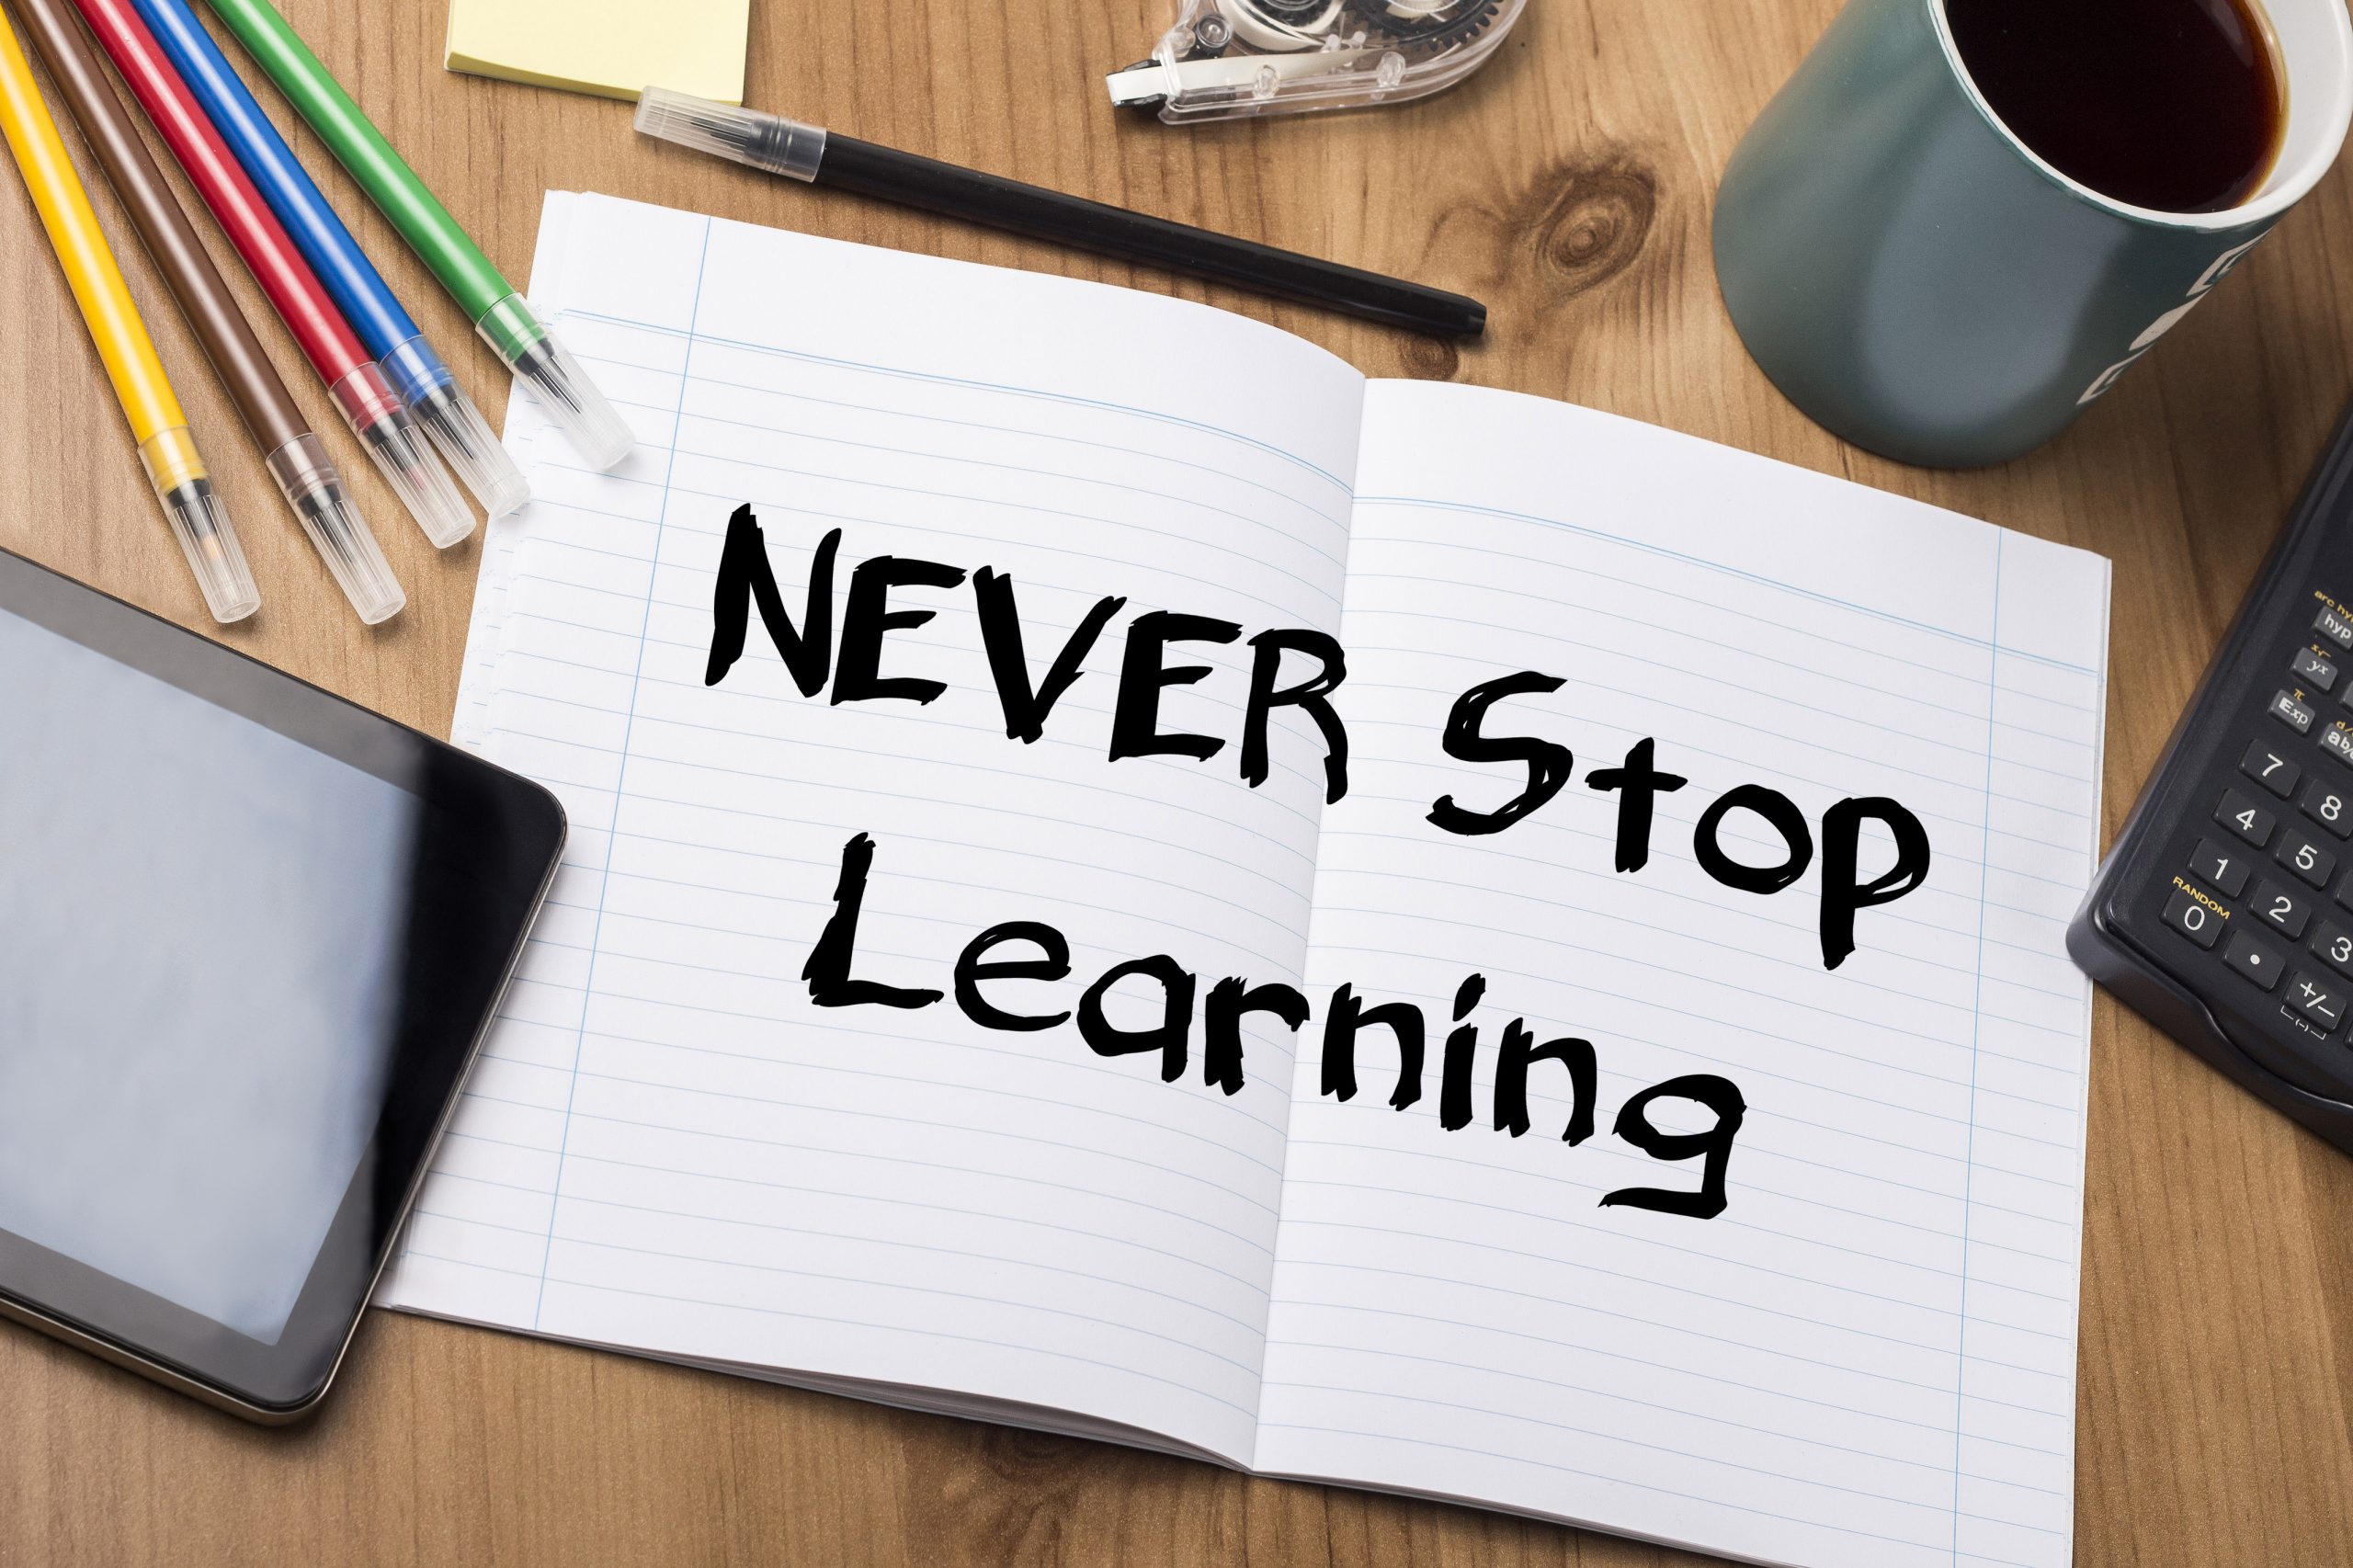 NEVER Stop Learning - Note Pad With Text On Wooden Table - with office  tools